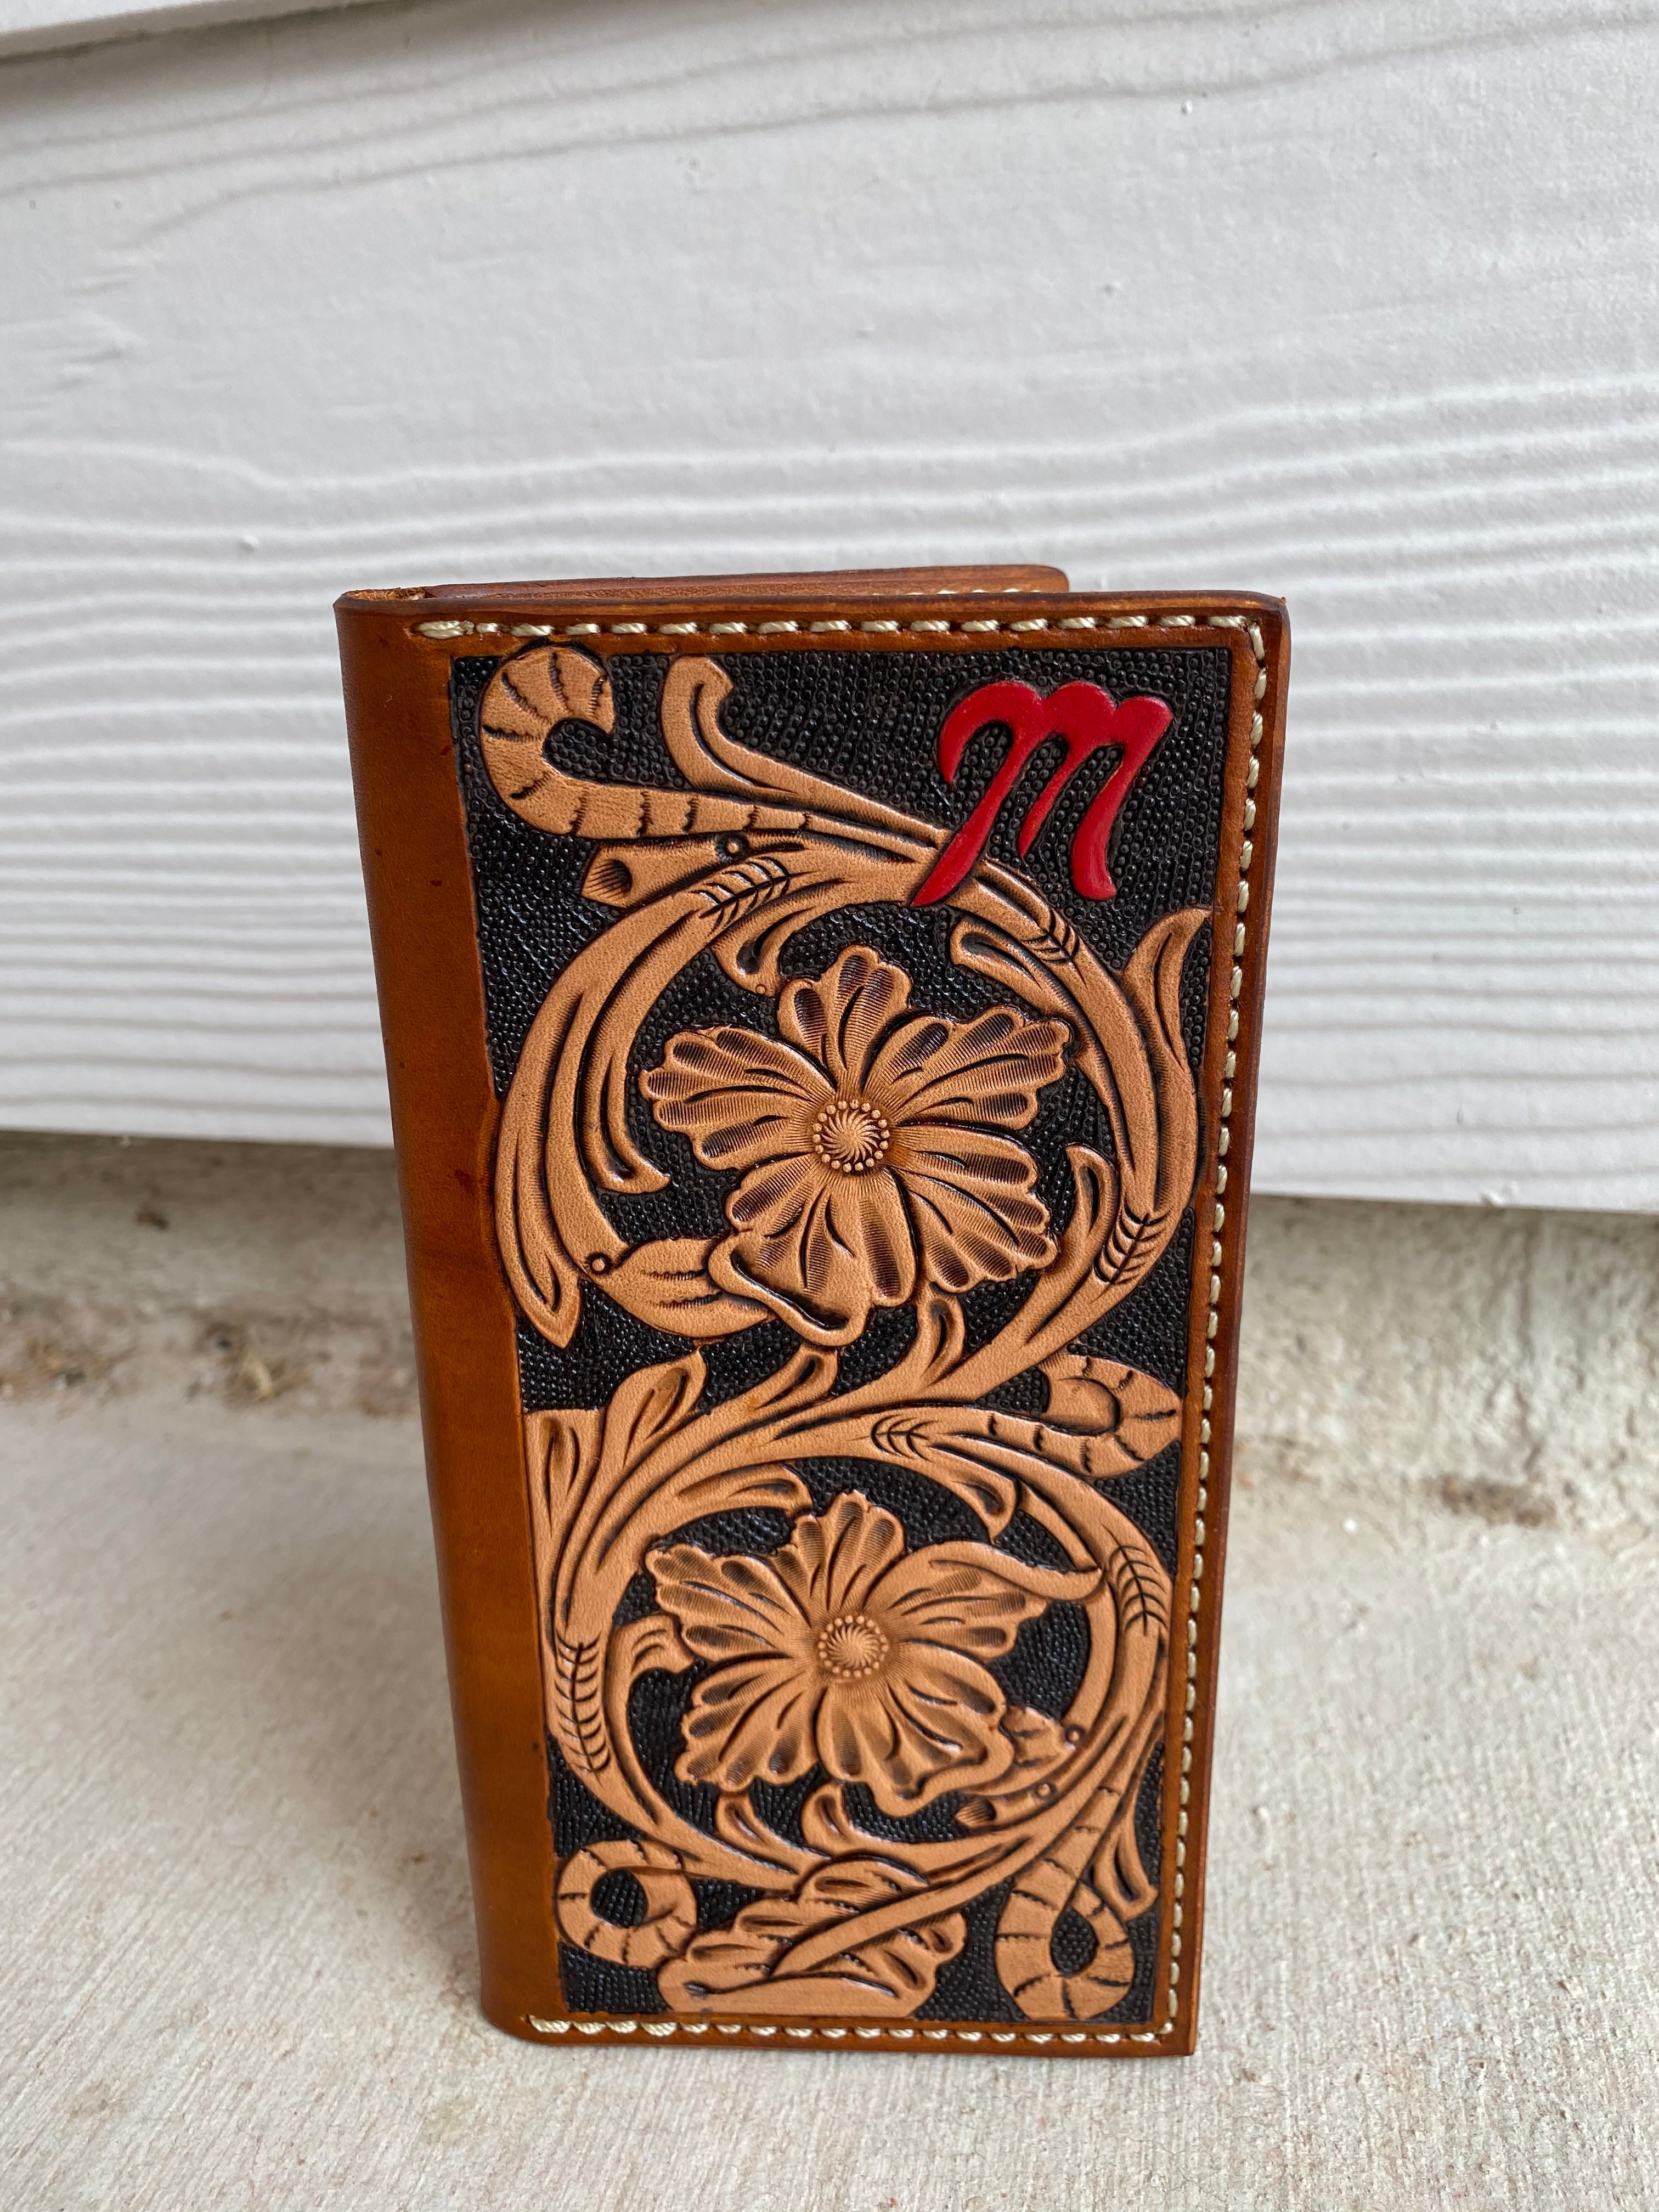 HANDMADE and hand tooled vintage style leather products from Mexico –  BellaRosaMexico